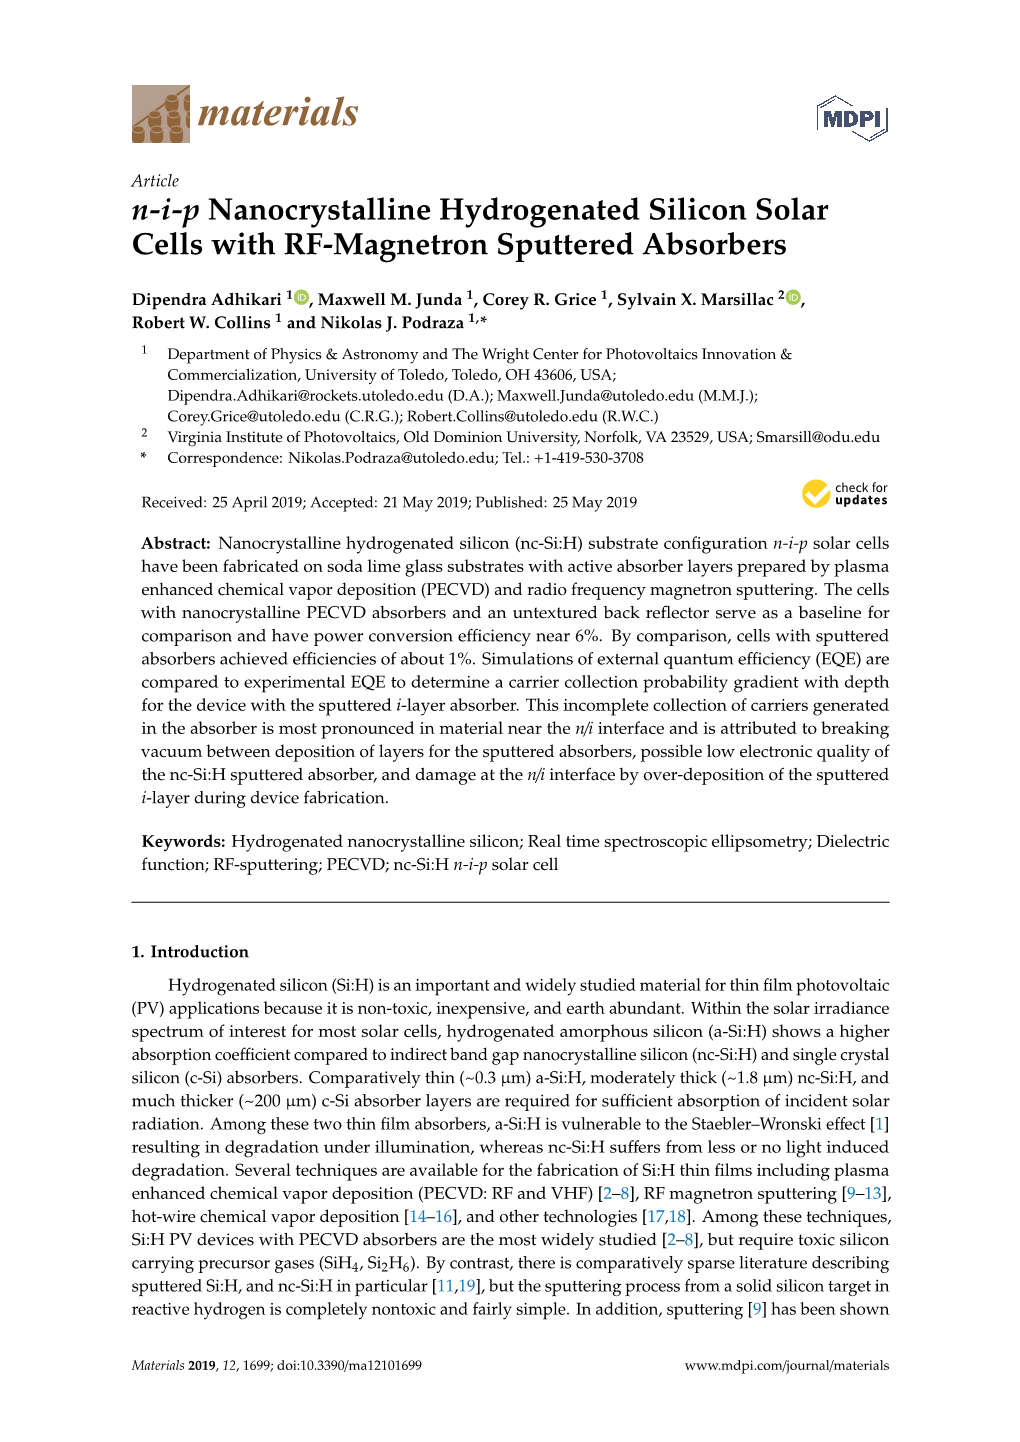 N-I-P Nanocrystalline Hydrogenated Silicon Solar Cells with RF-Magnetron Sputtered Absorbers